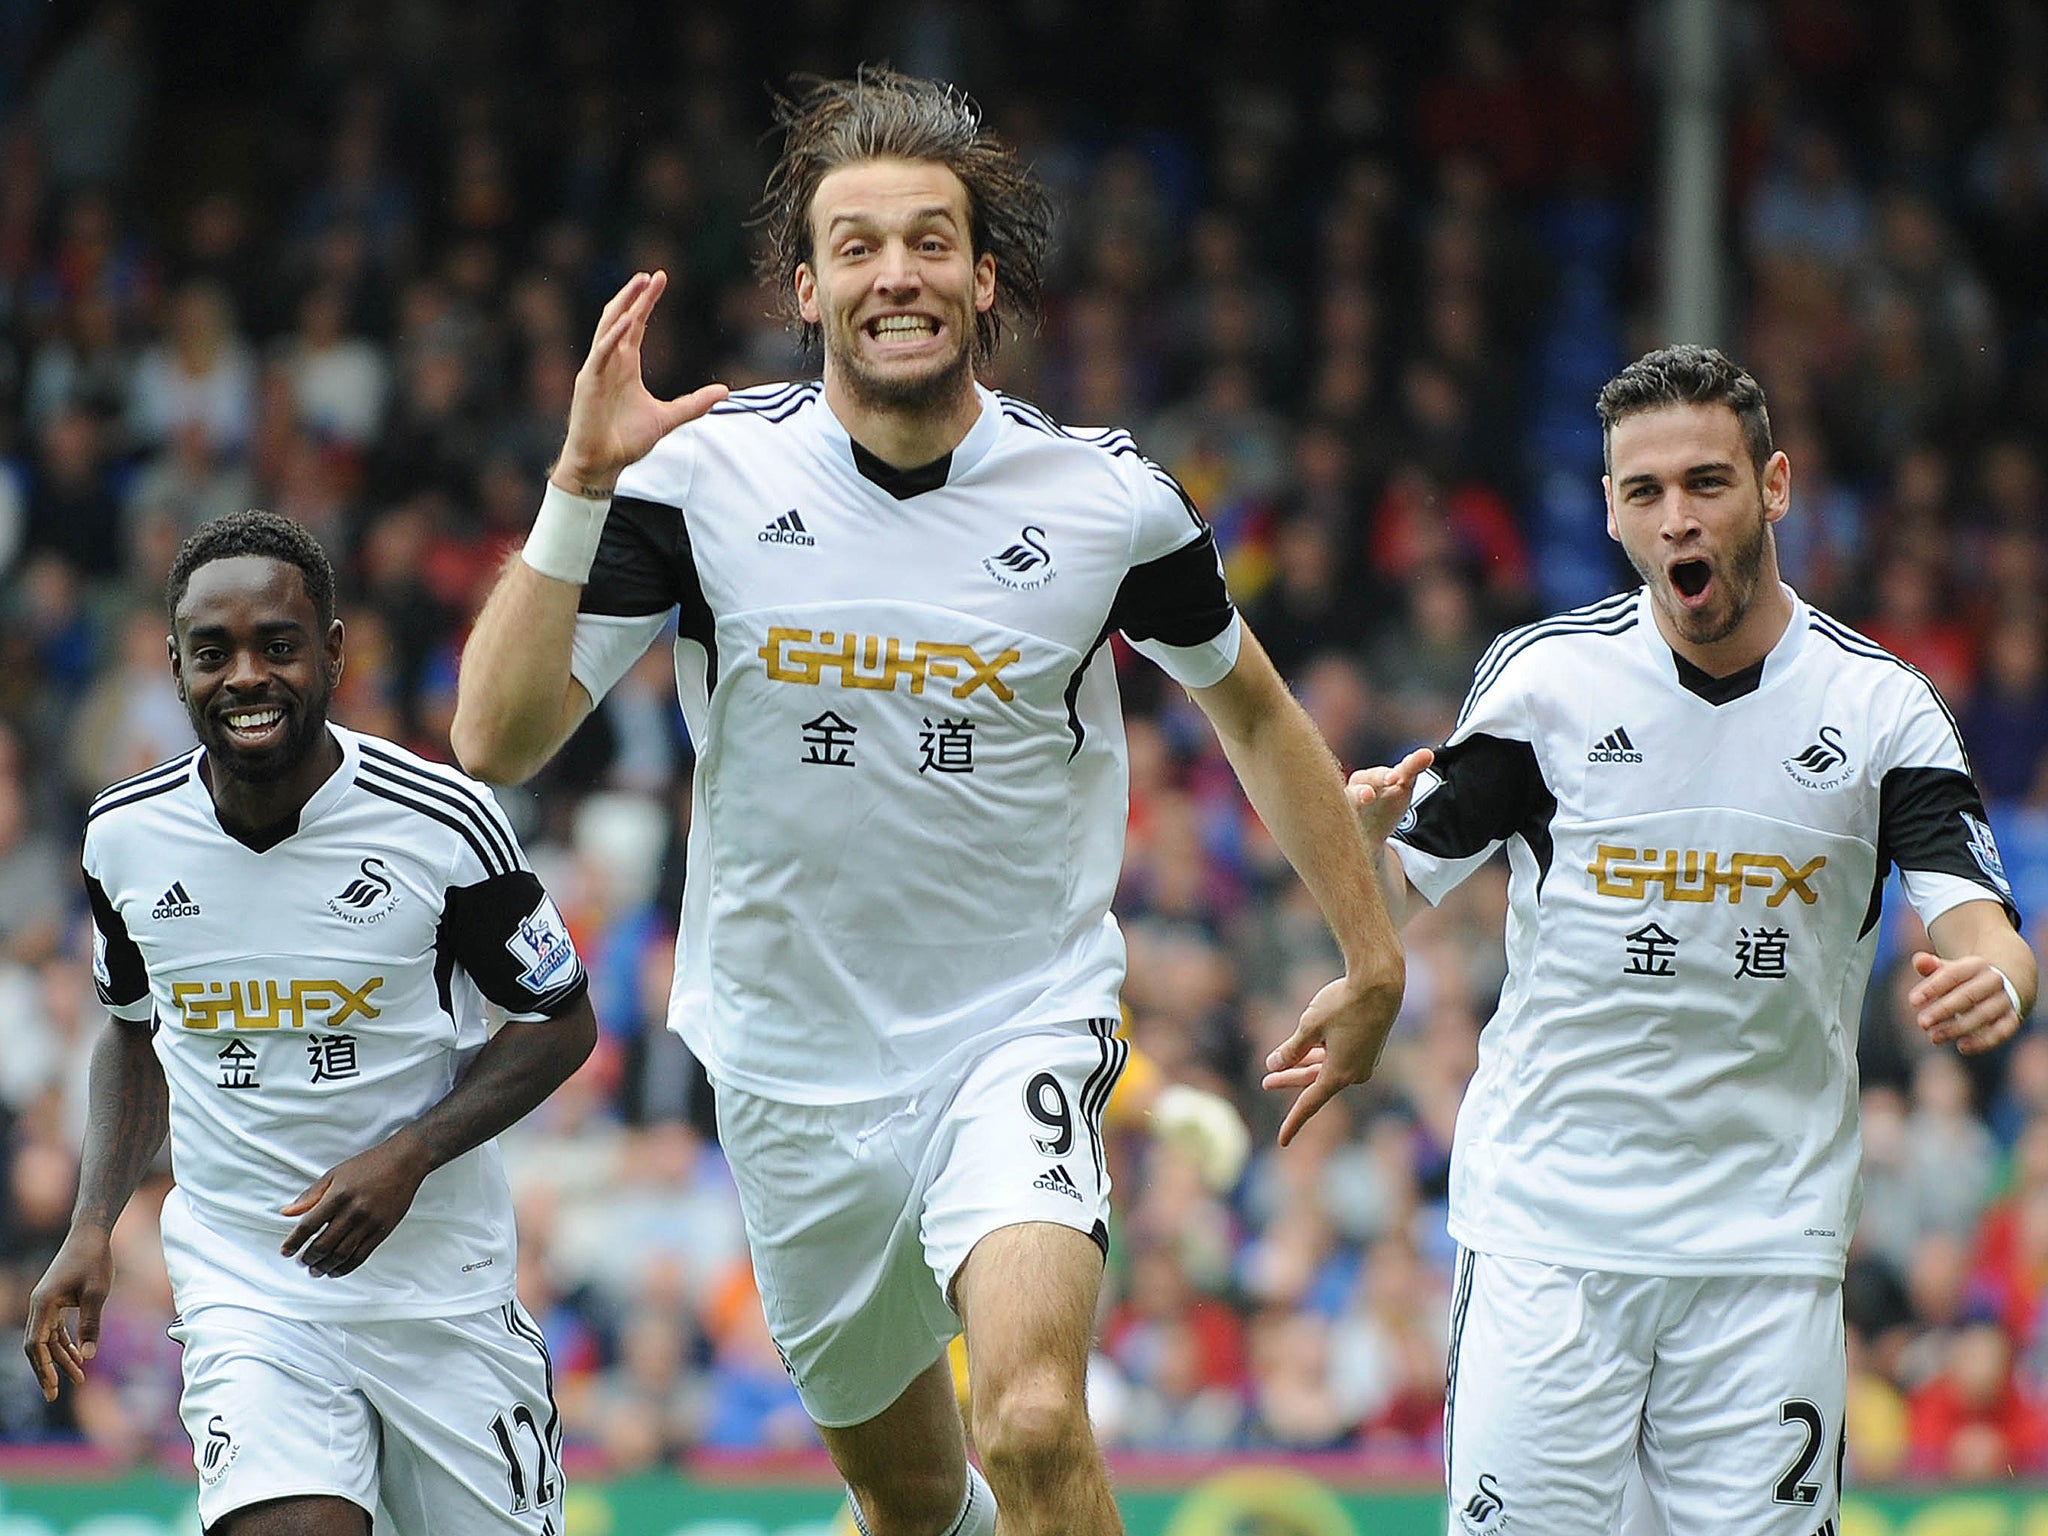 Michu celebrates after scoring for Swansea against Crystal Palace